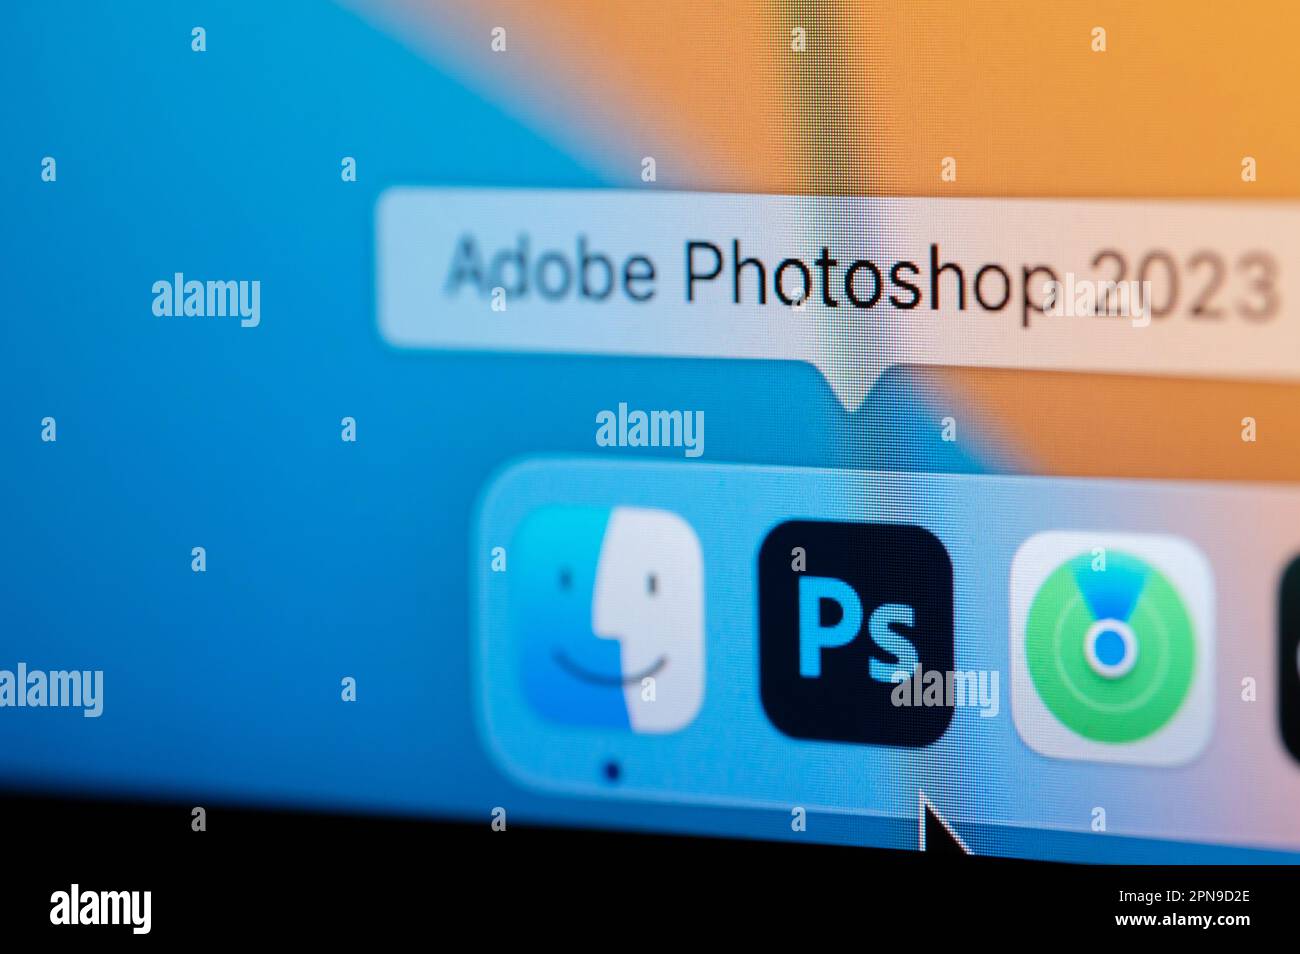 New york, USA - April 12, 2023: Open Adobe Photoshop 2023 app in macbook dock to edit photo on computer screen close up view Stock Photo